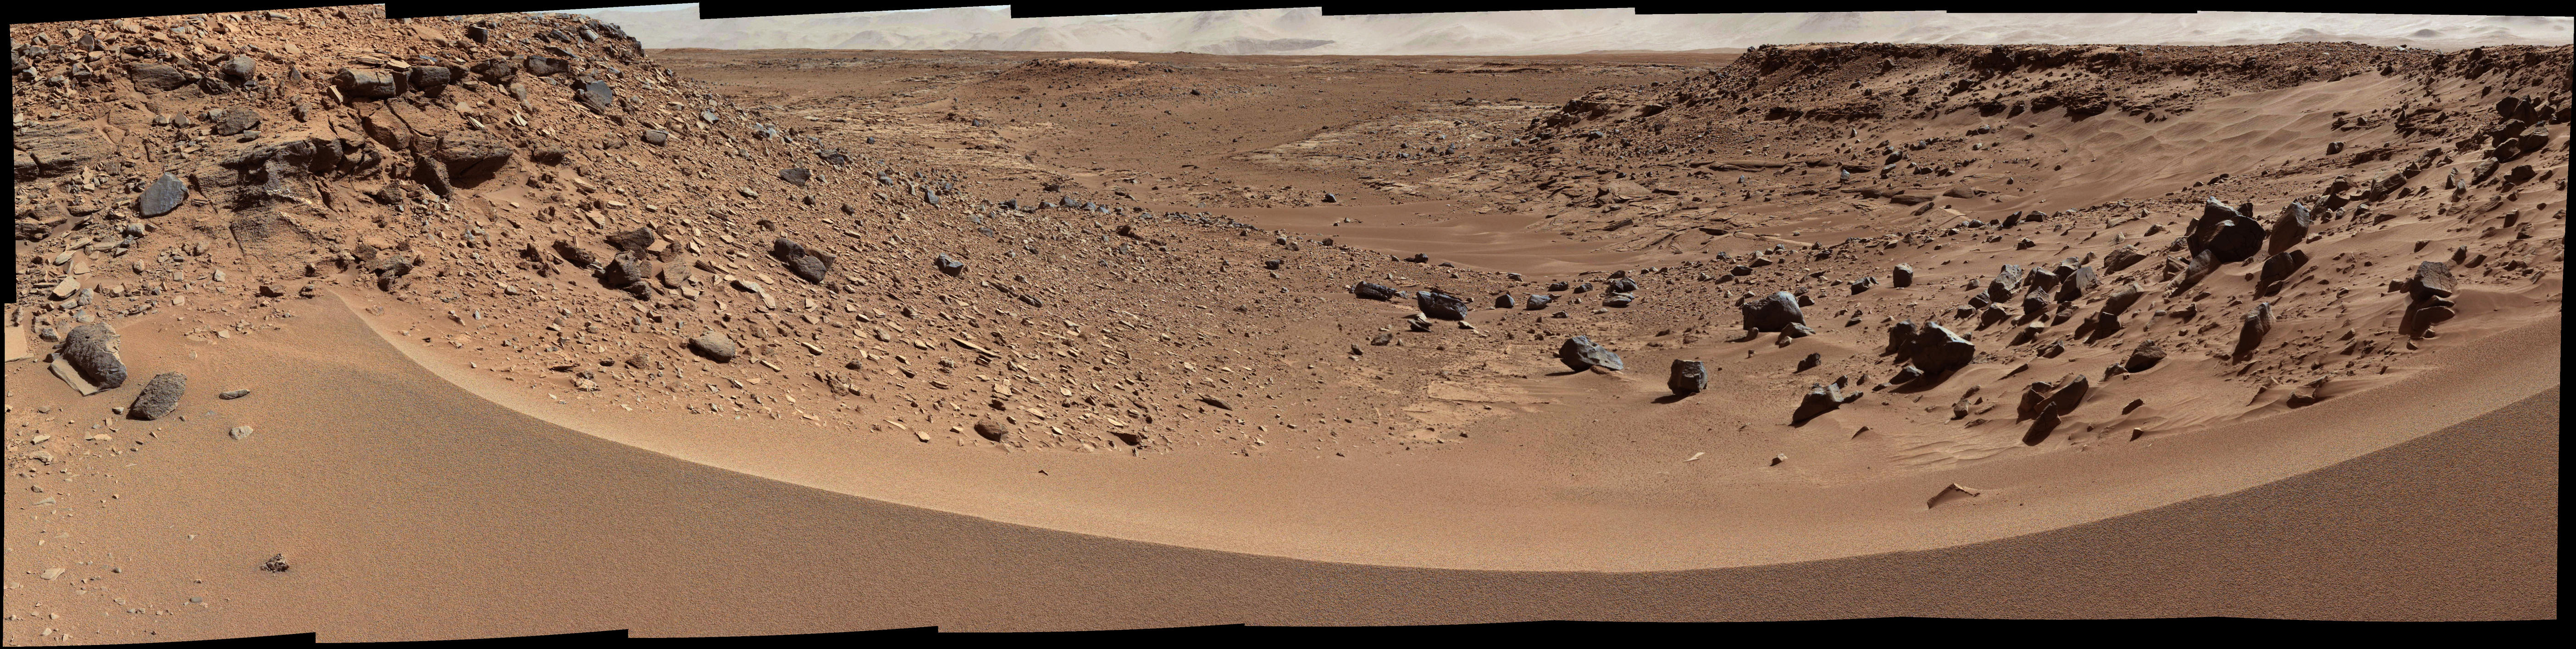 Martian Valley May Be Curiosity's Route (White-Balanced)